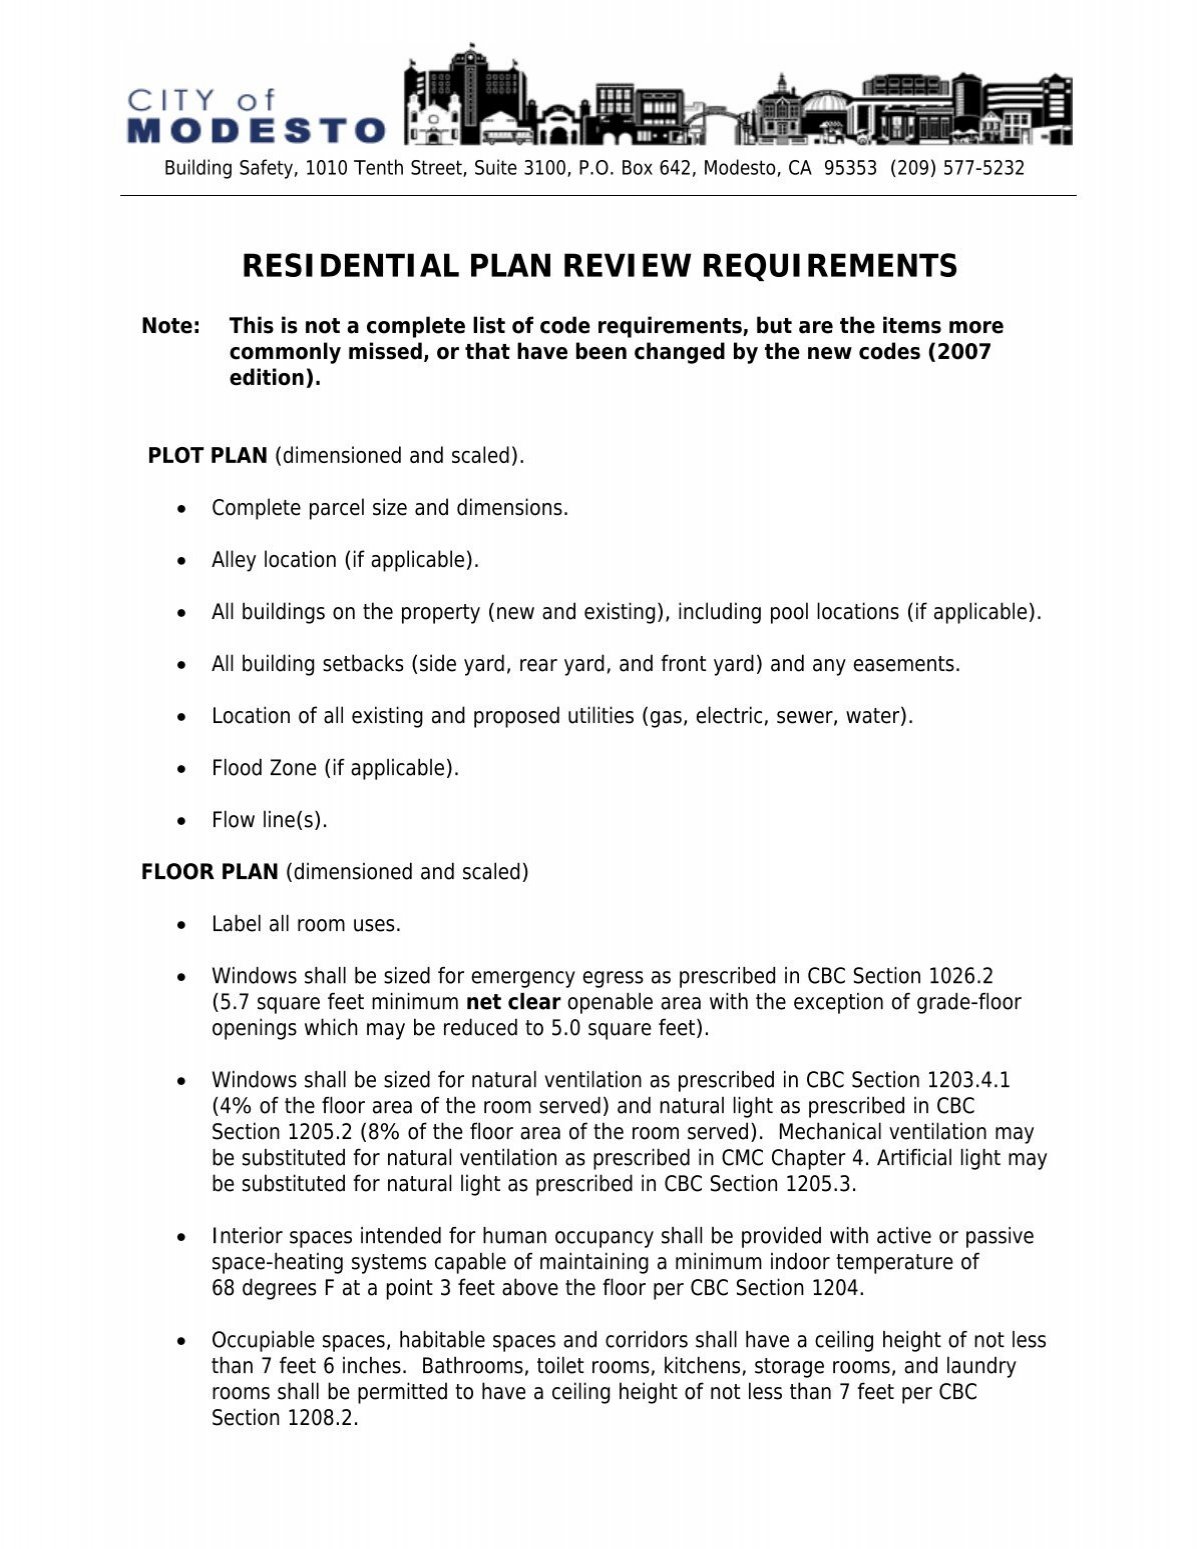 RESIDENTIAL PLAN REVIEW CHECKLIST